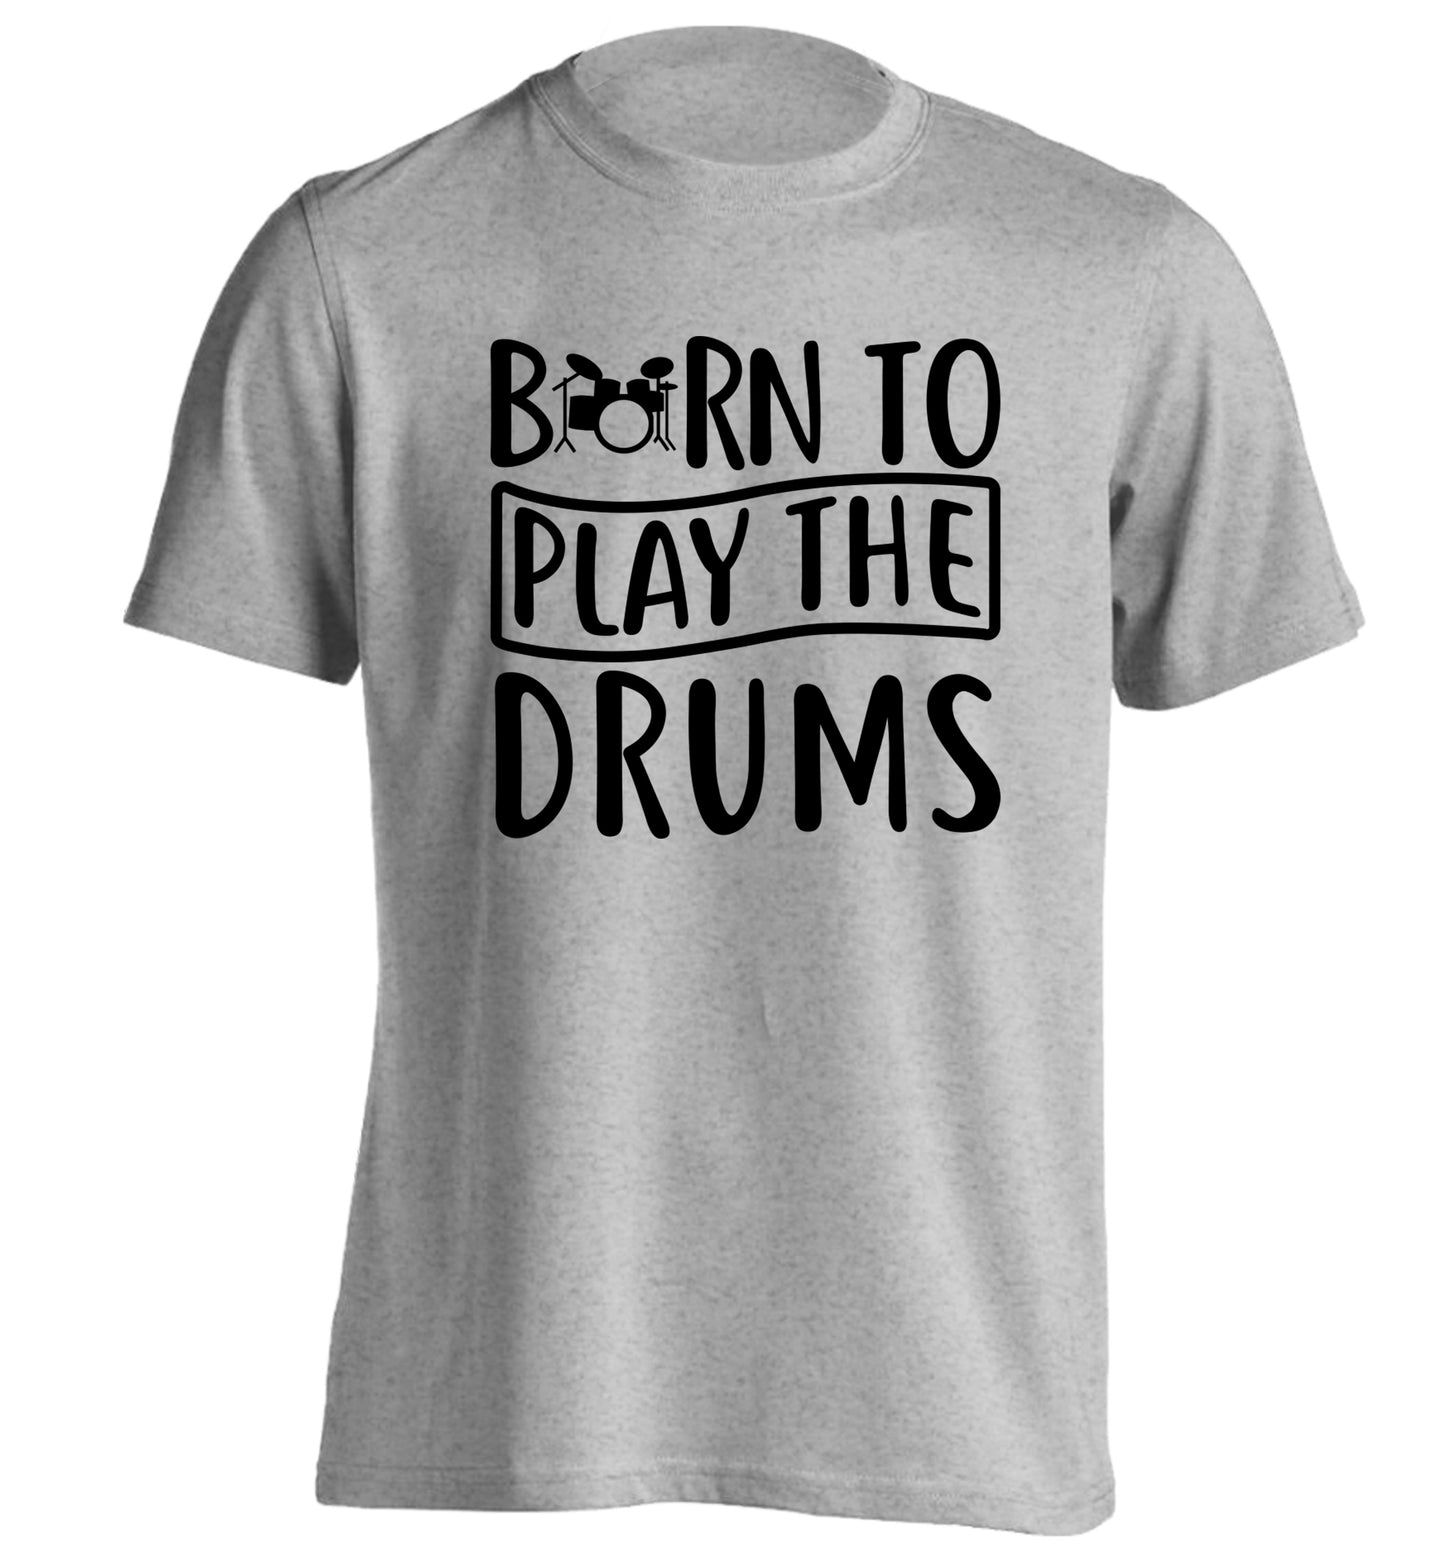 Born to play the drums adults unisex grey Tshirt 2XL